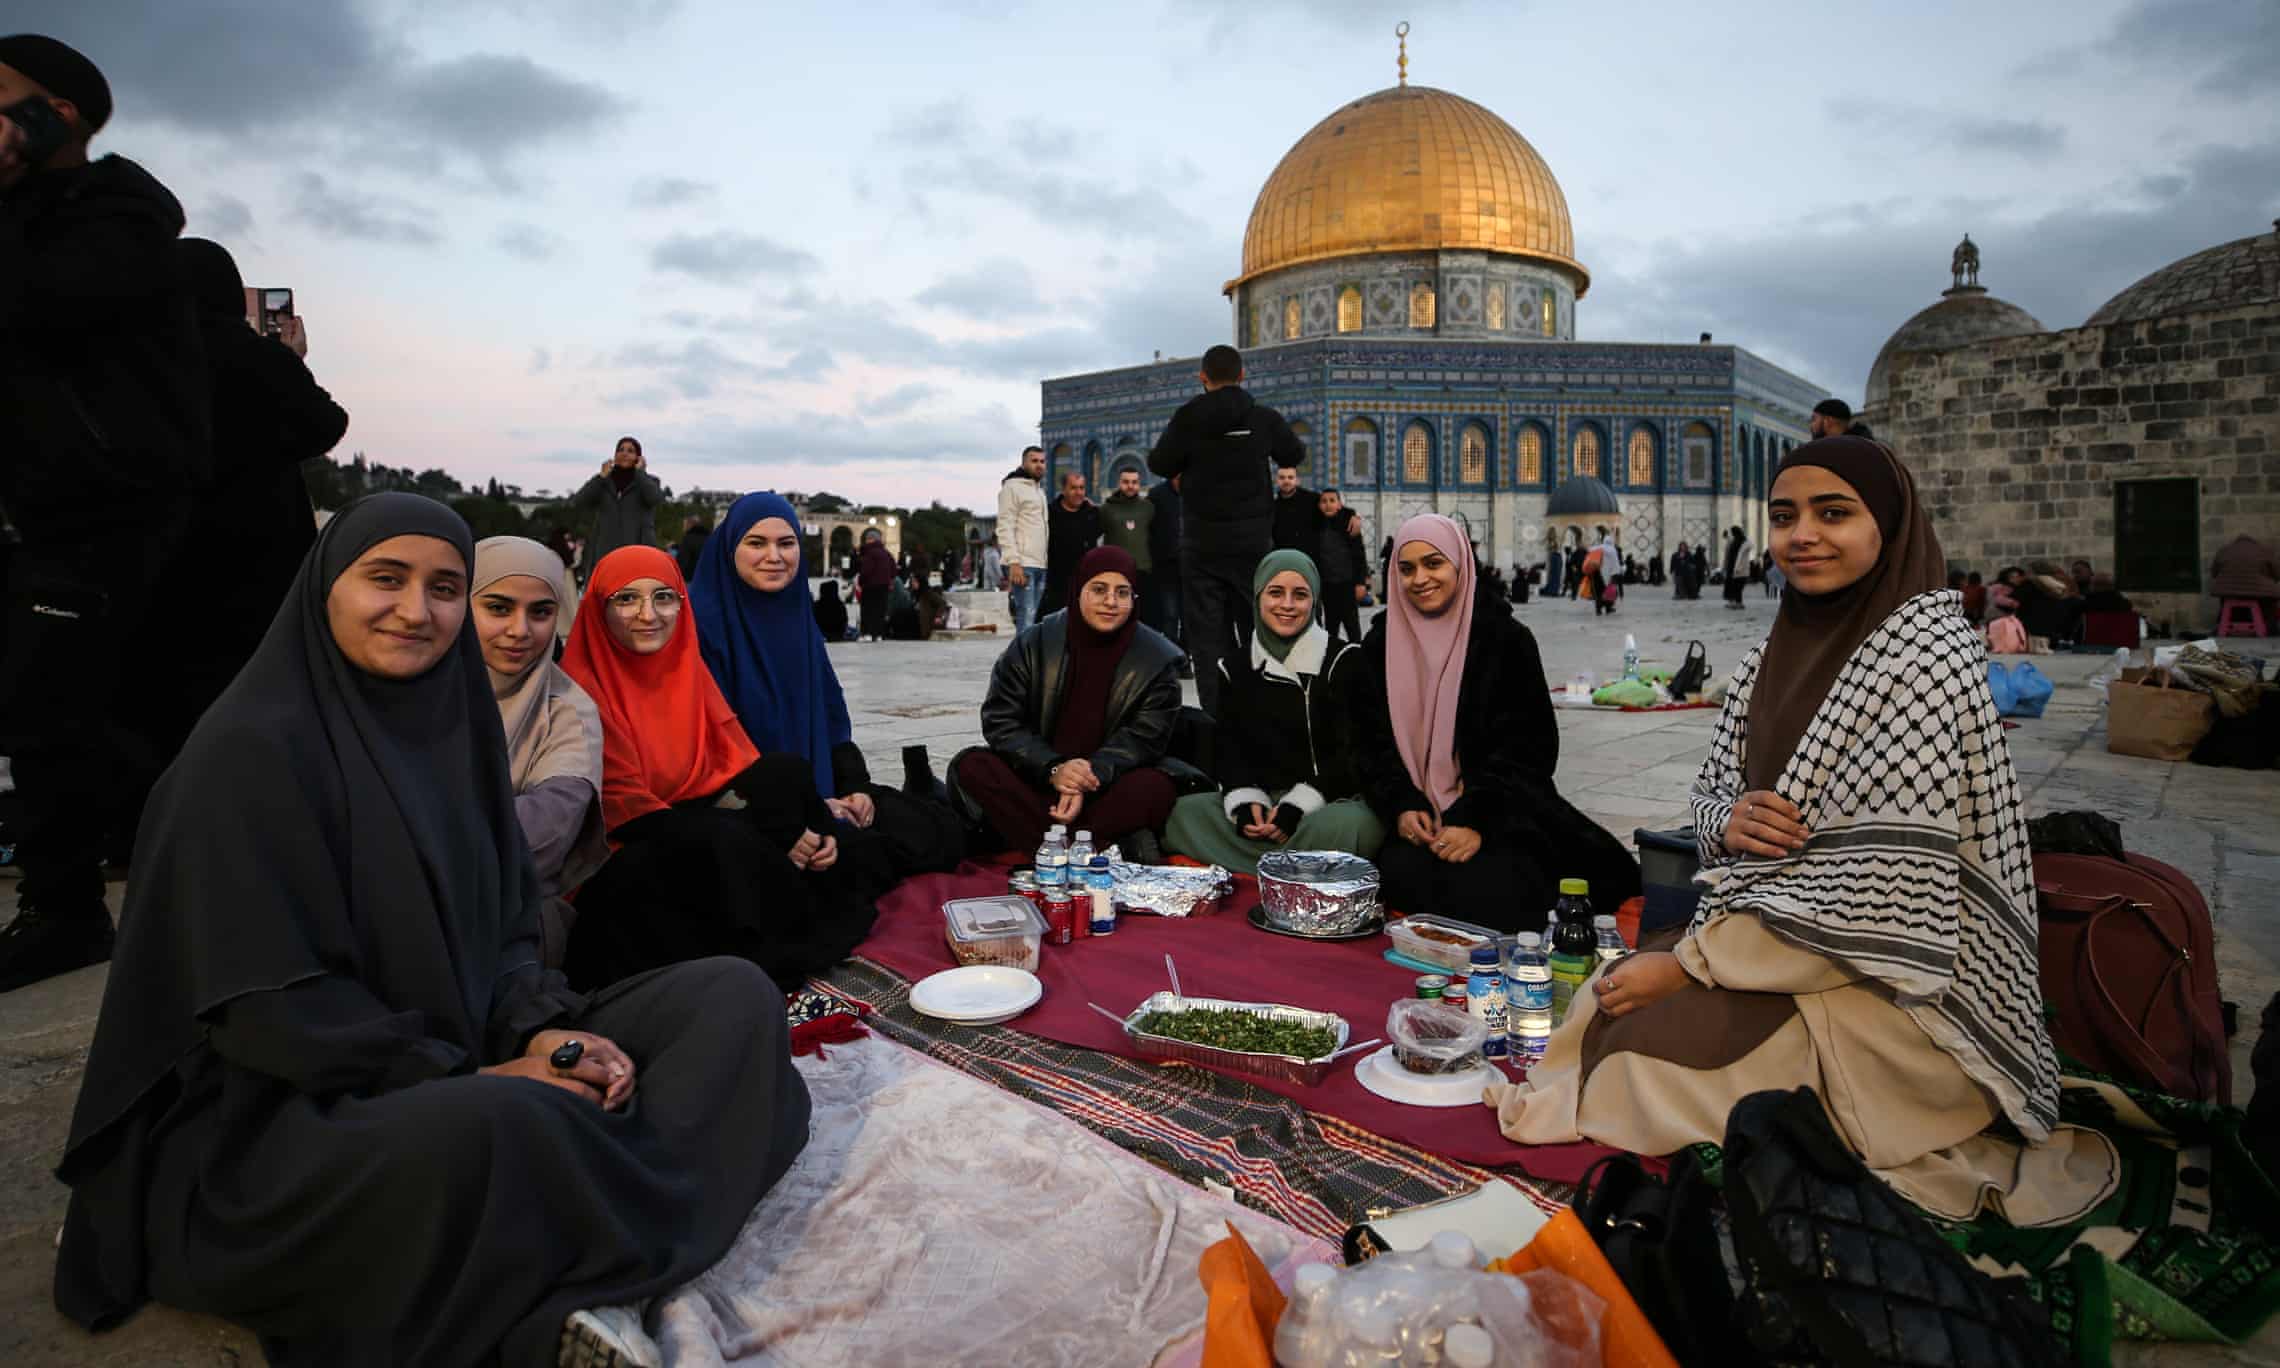 Muslim women at Dome of the Rock